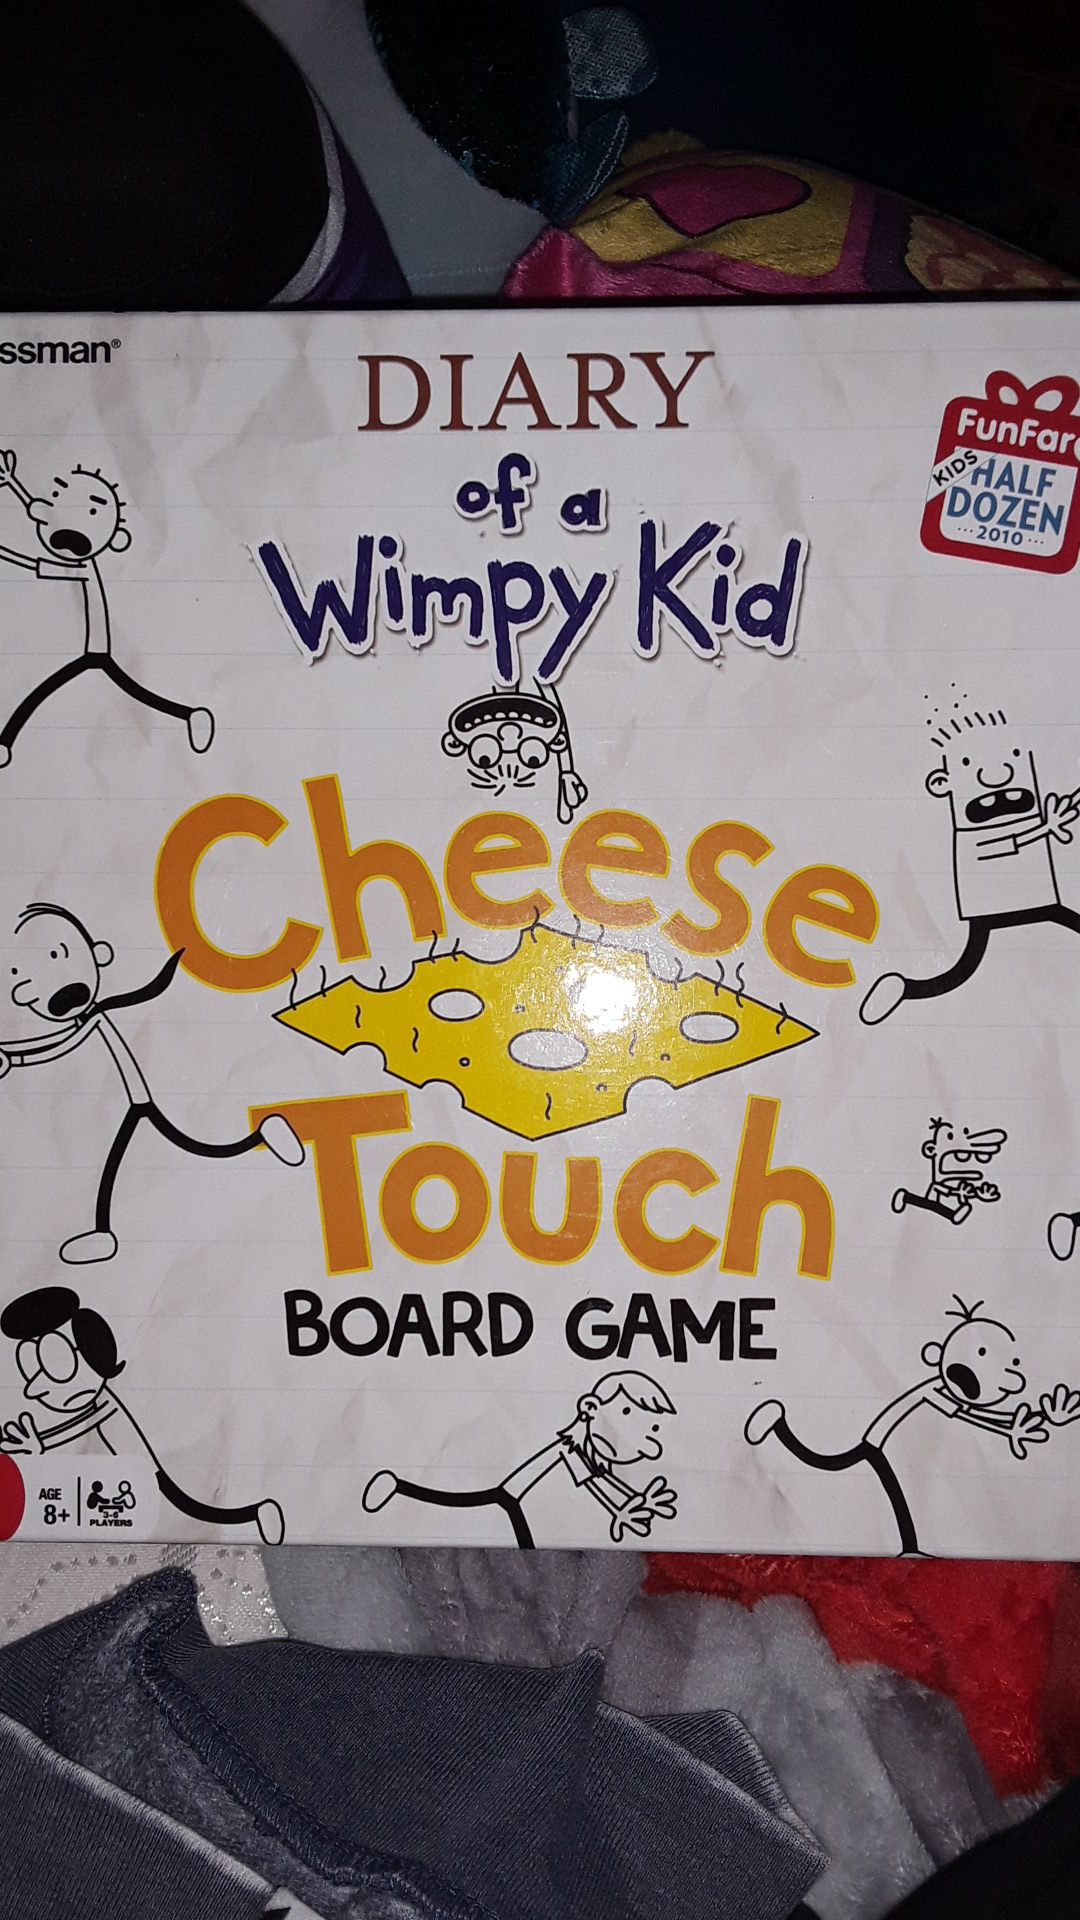 Diary of a wimpy kid cheese touch board game